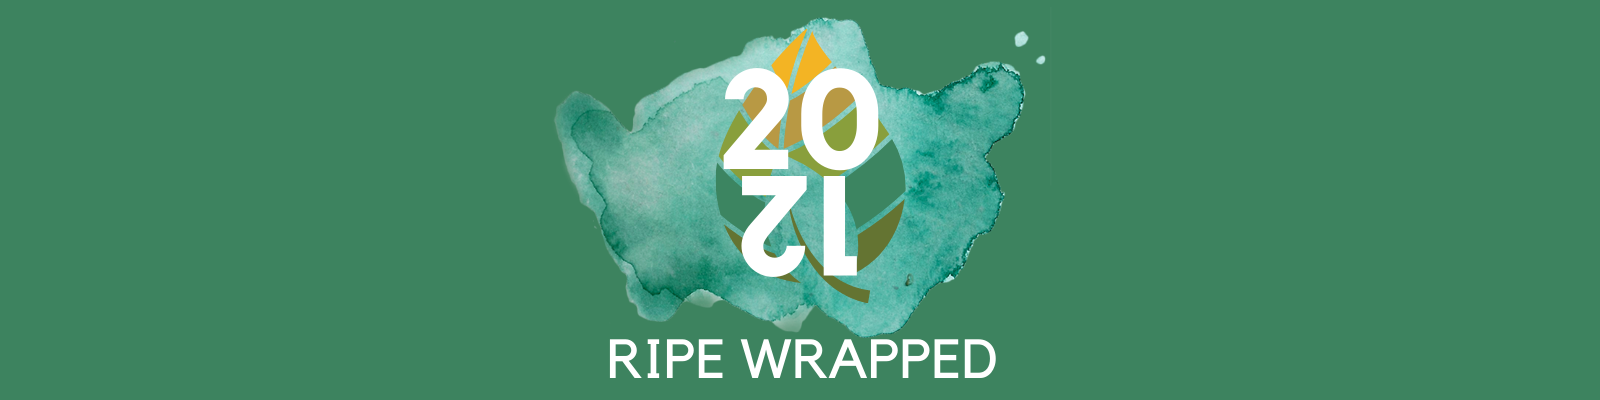 RIPE Wrapped 2021